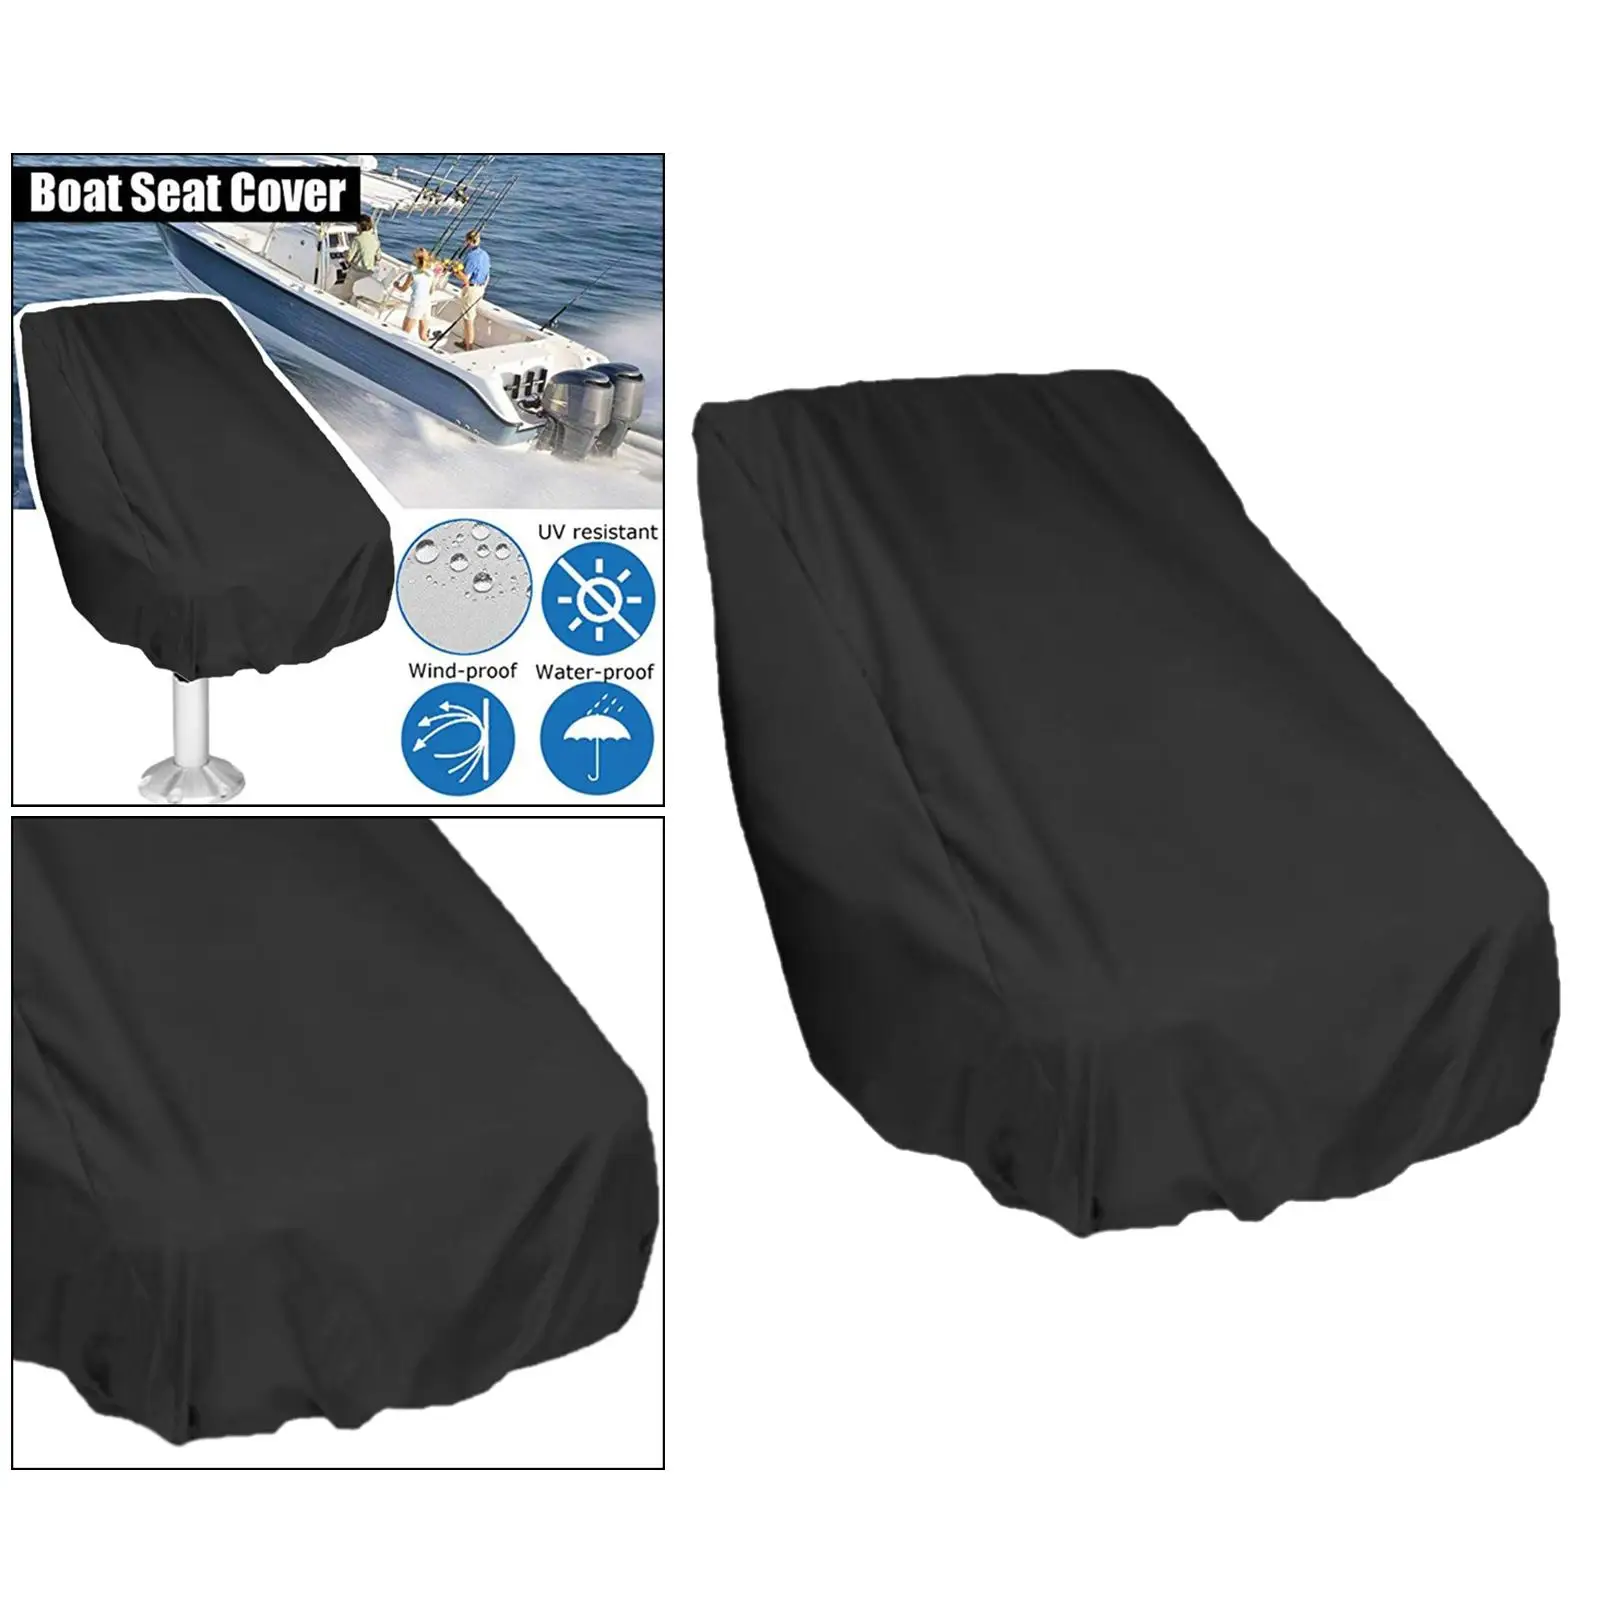 Boat Seat Cover Outdoor Foldable Ship Fishing Waterproof Dust     Yacht Furniture  22x24x25.2inch